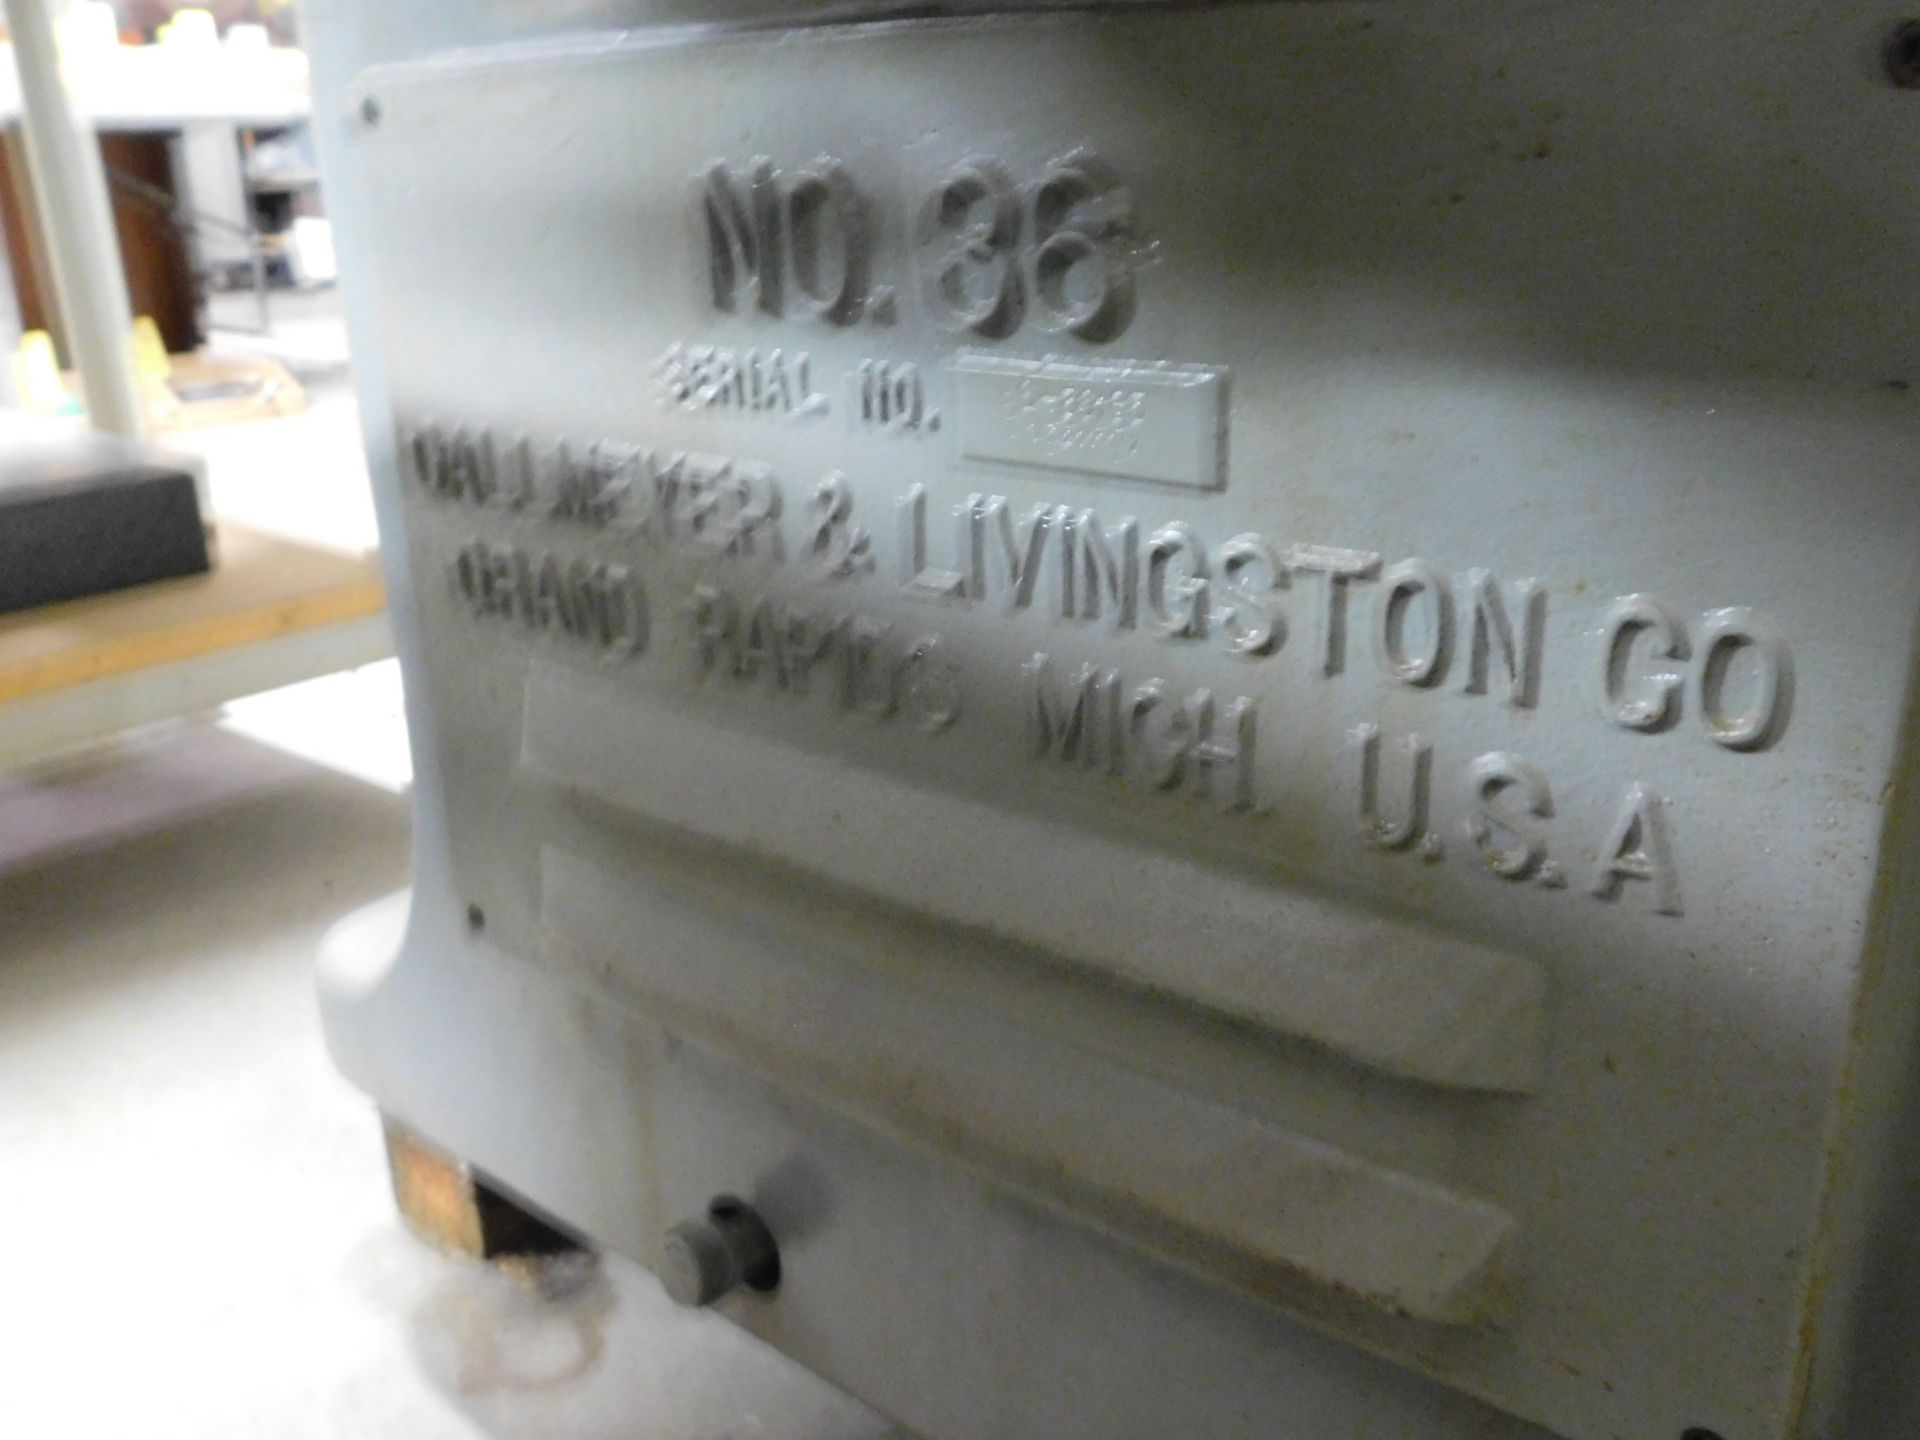 GallMeyer & Livingston N0. 36 Hydraulic Surface Grinder 10"X24" Electro magnetic Chuck, Load Fee $